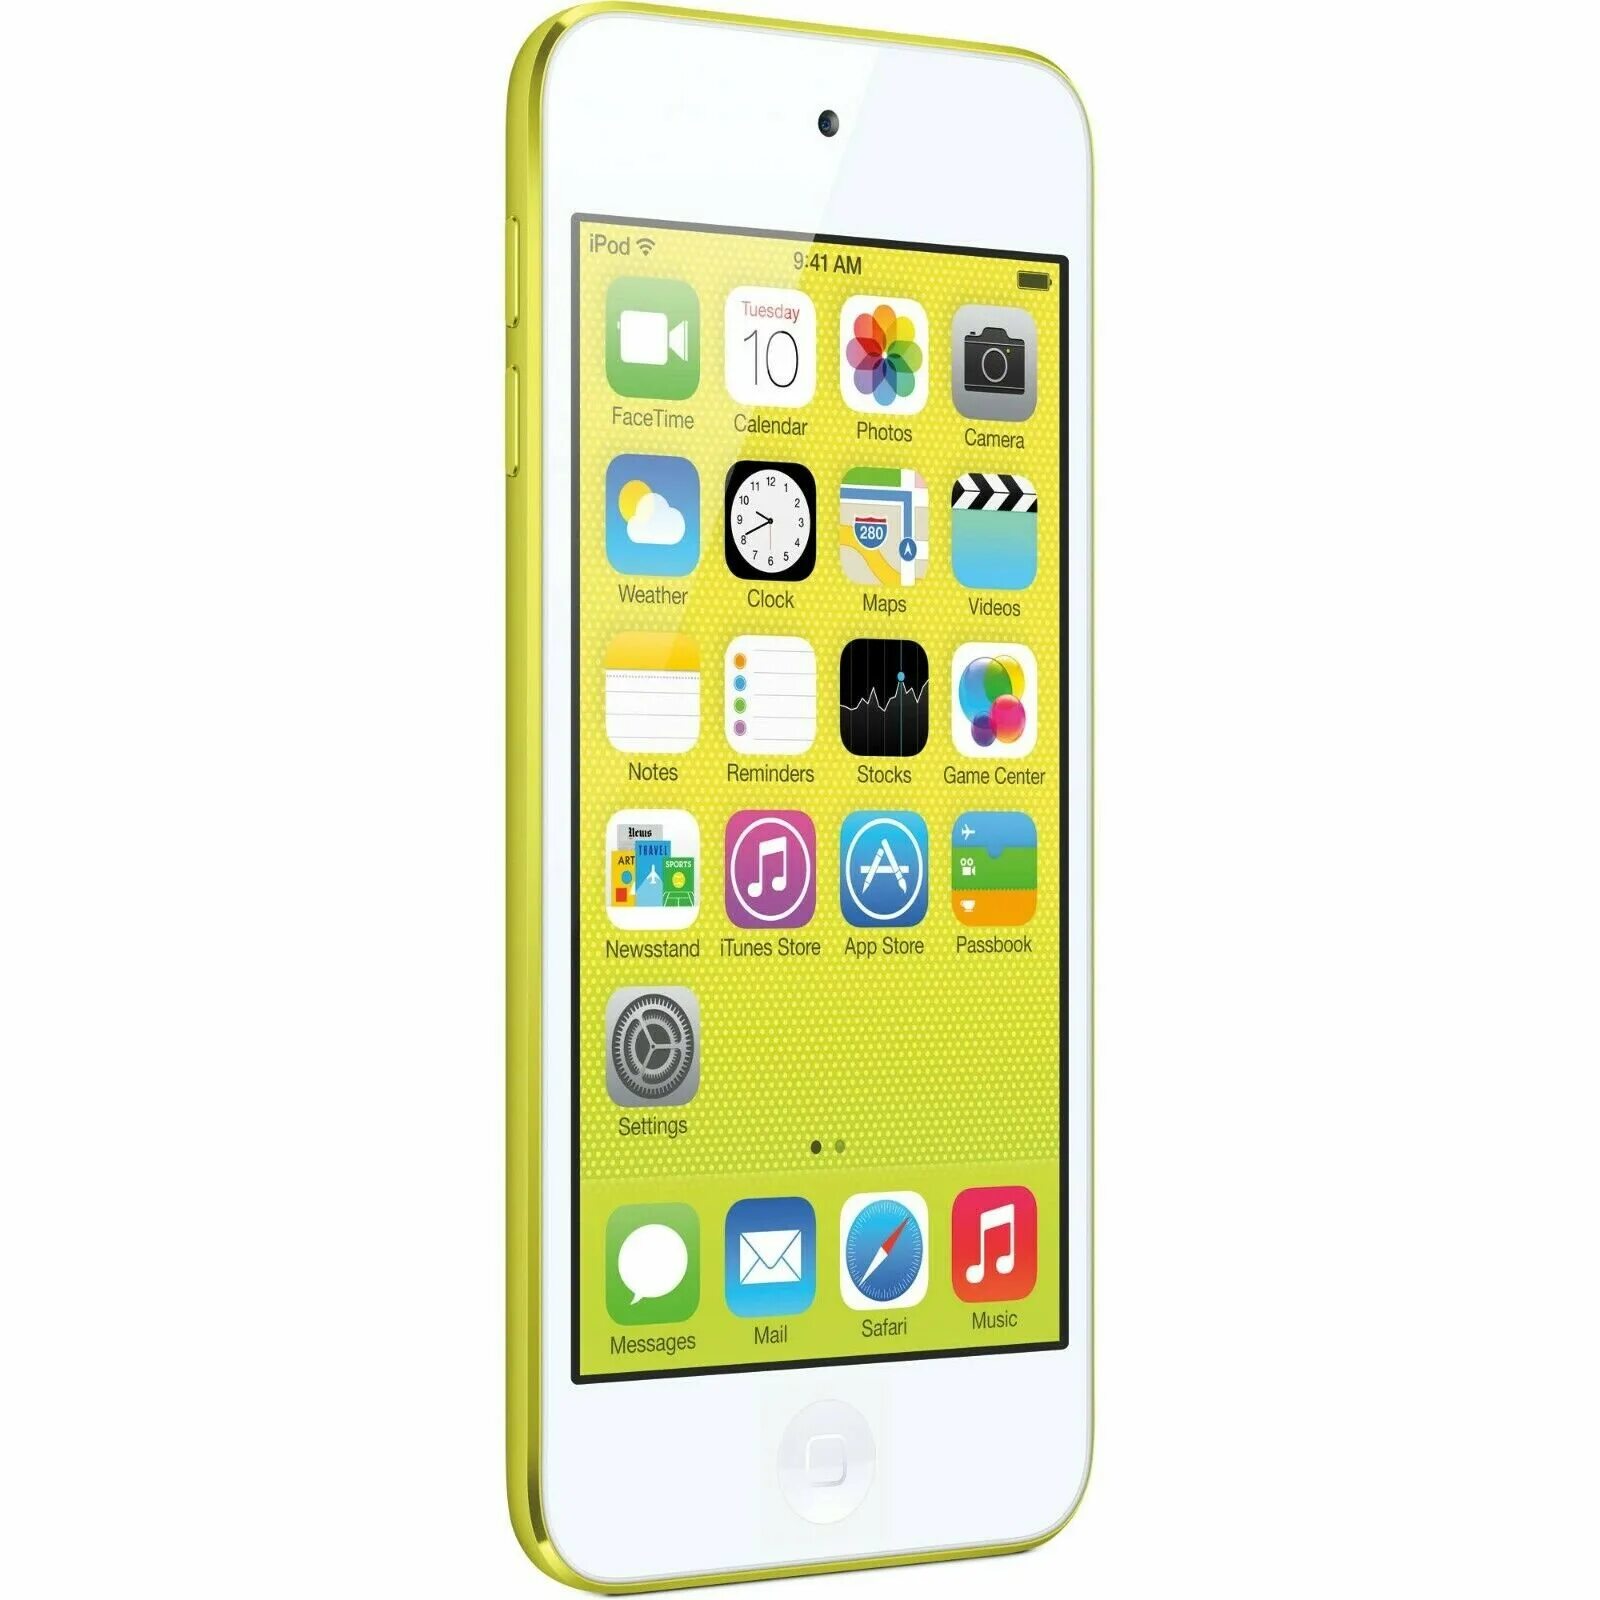 Apple IPOD Touch 5. Apple плеер IPOD Touch 5. Плеер Apple IPOD Touch 6 16gb. IPOD 5 32 GB.